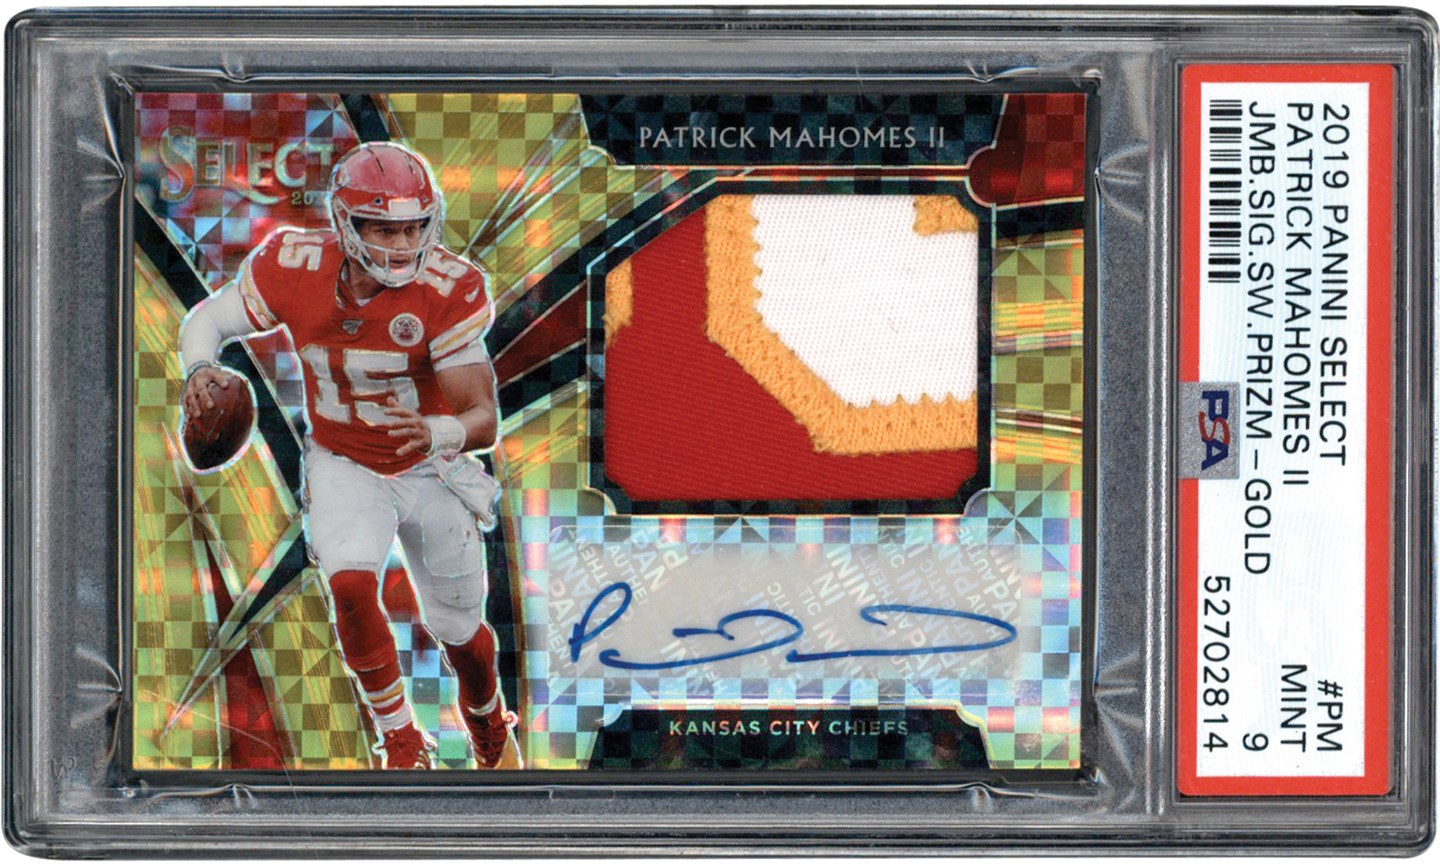 - 2019 Panini Select Football Prizm Jumbo Signatures Gold #PM Patrick Mahomes Autograph Patch Card #1/5 PSA MT 9 (Pop 1 of 2 Highest Graded)